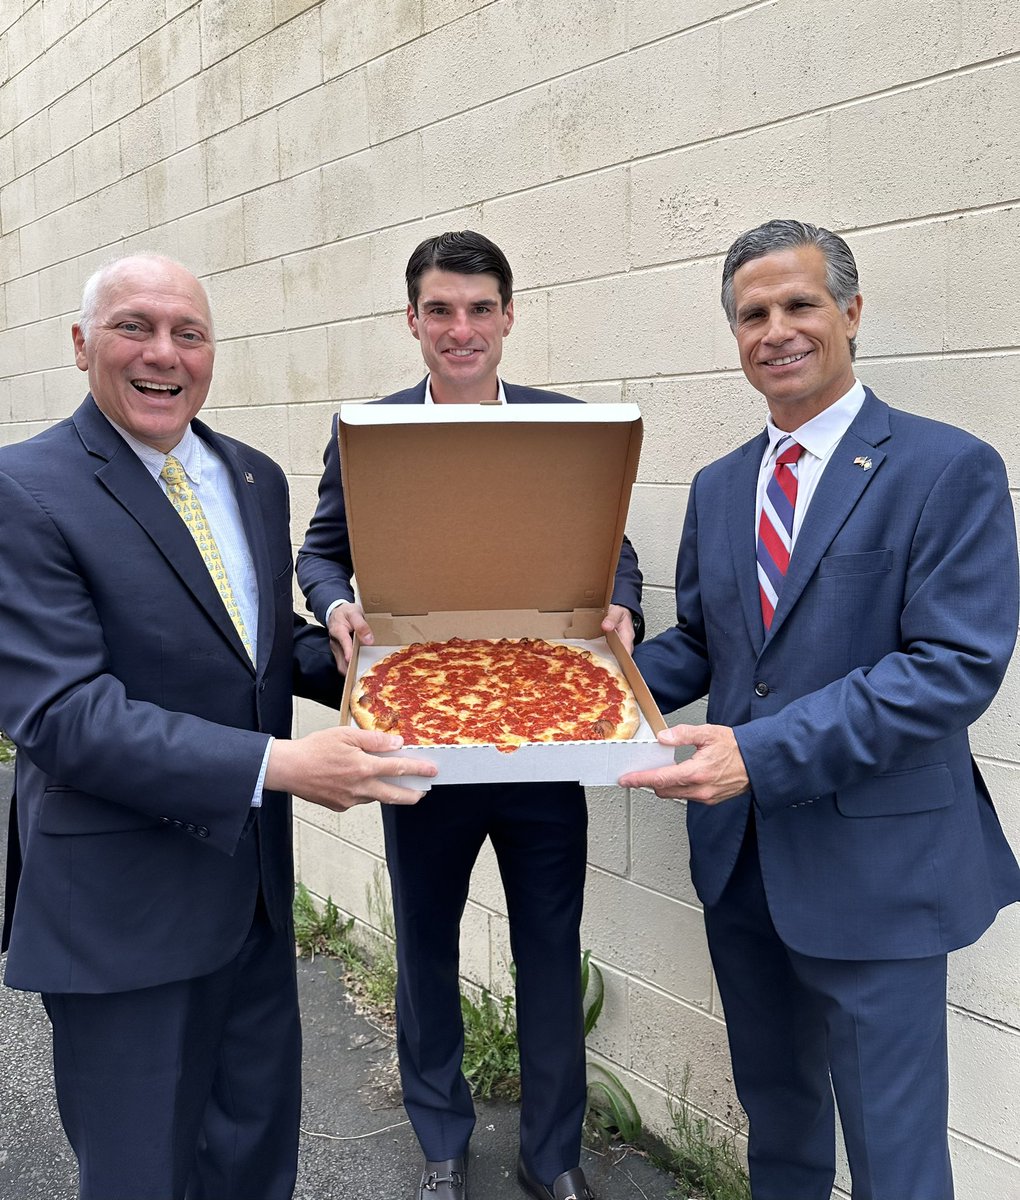 Welcome to NEPA, @SteveScaliseGOP! We’re home to the best people, politics, and pizza! #PA08